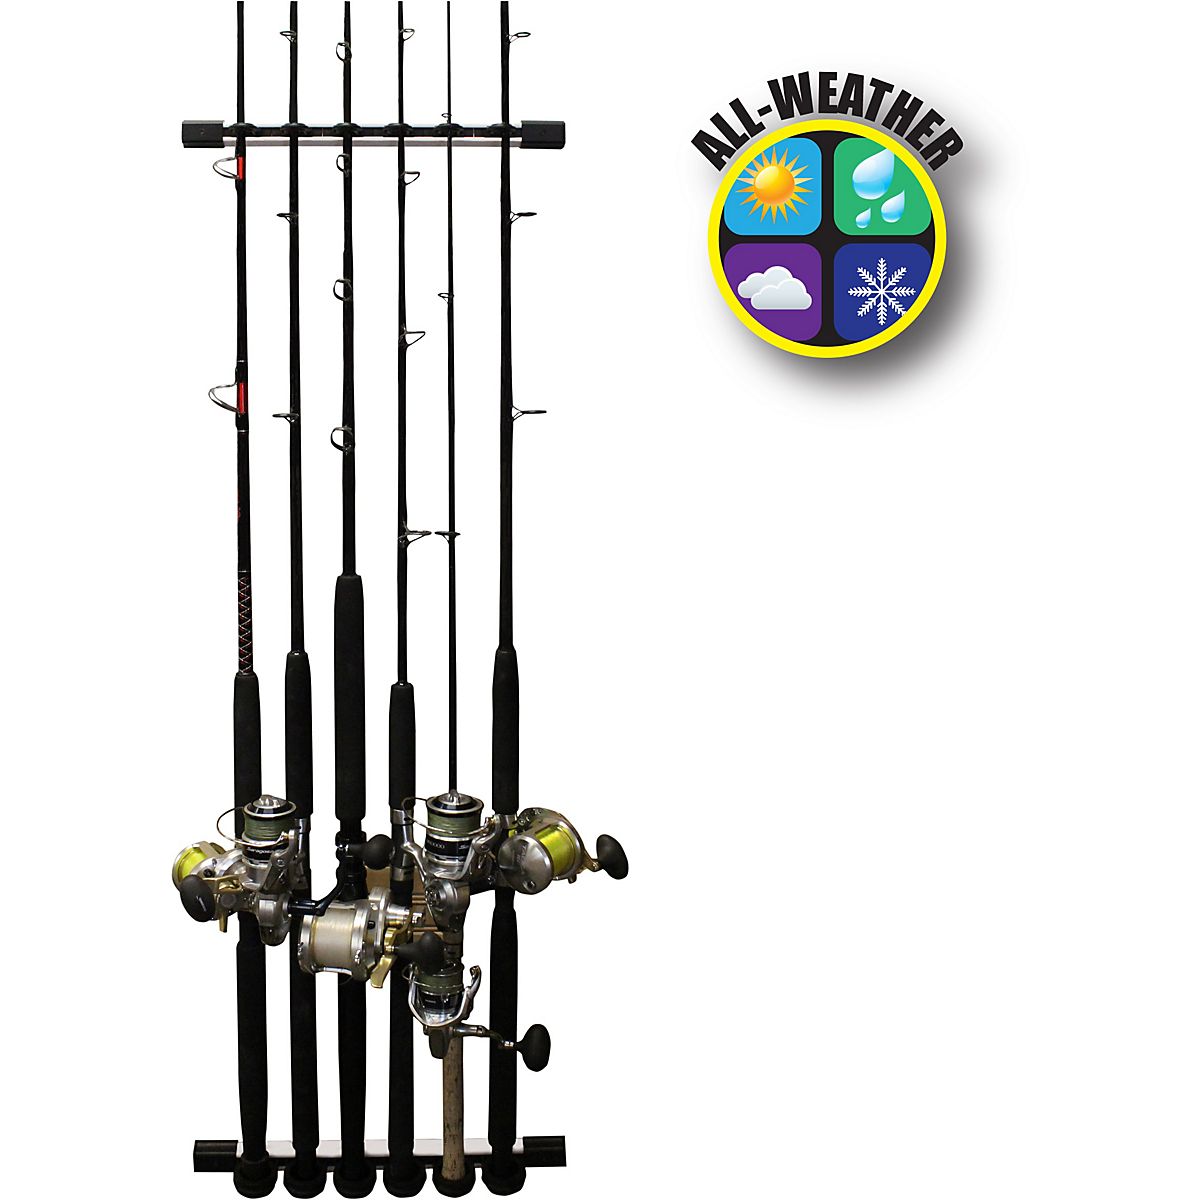  Coldcreek Outfitters Universal Fishing Rod Rack, Fishing Gear,  Fishing Accessories, Rod Holder, Pole Storage, Wall Mount, Cieling Mount,  24 L x 3 W x 3 H : Sports & Outdoors